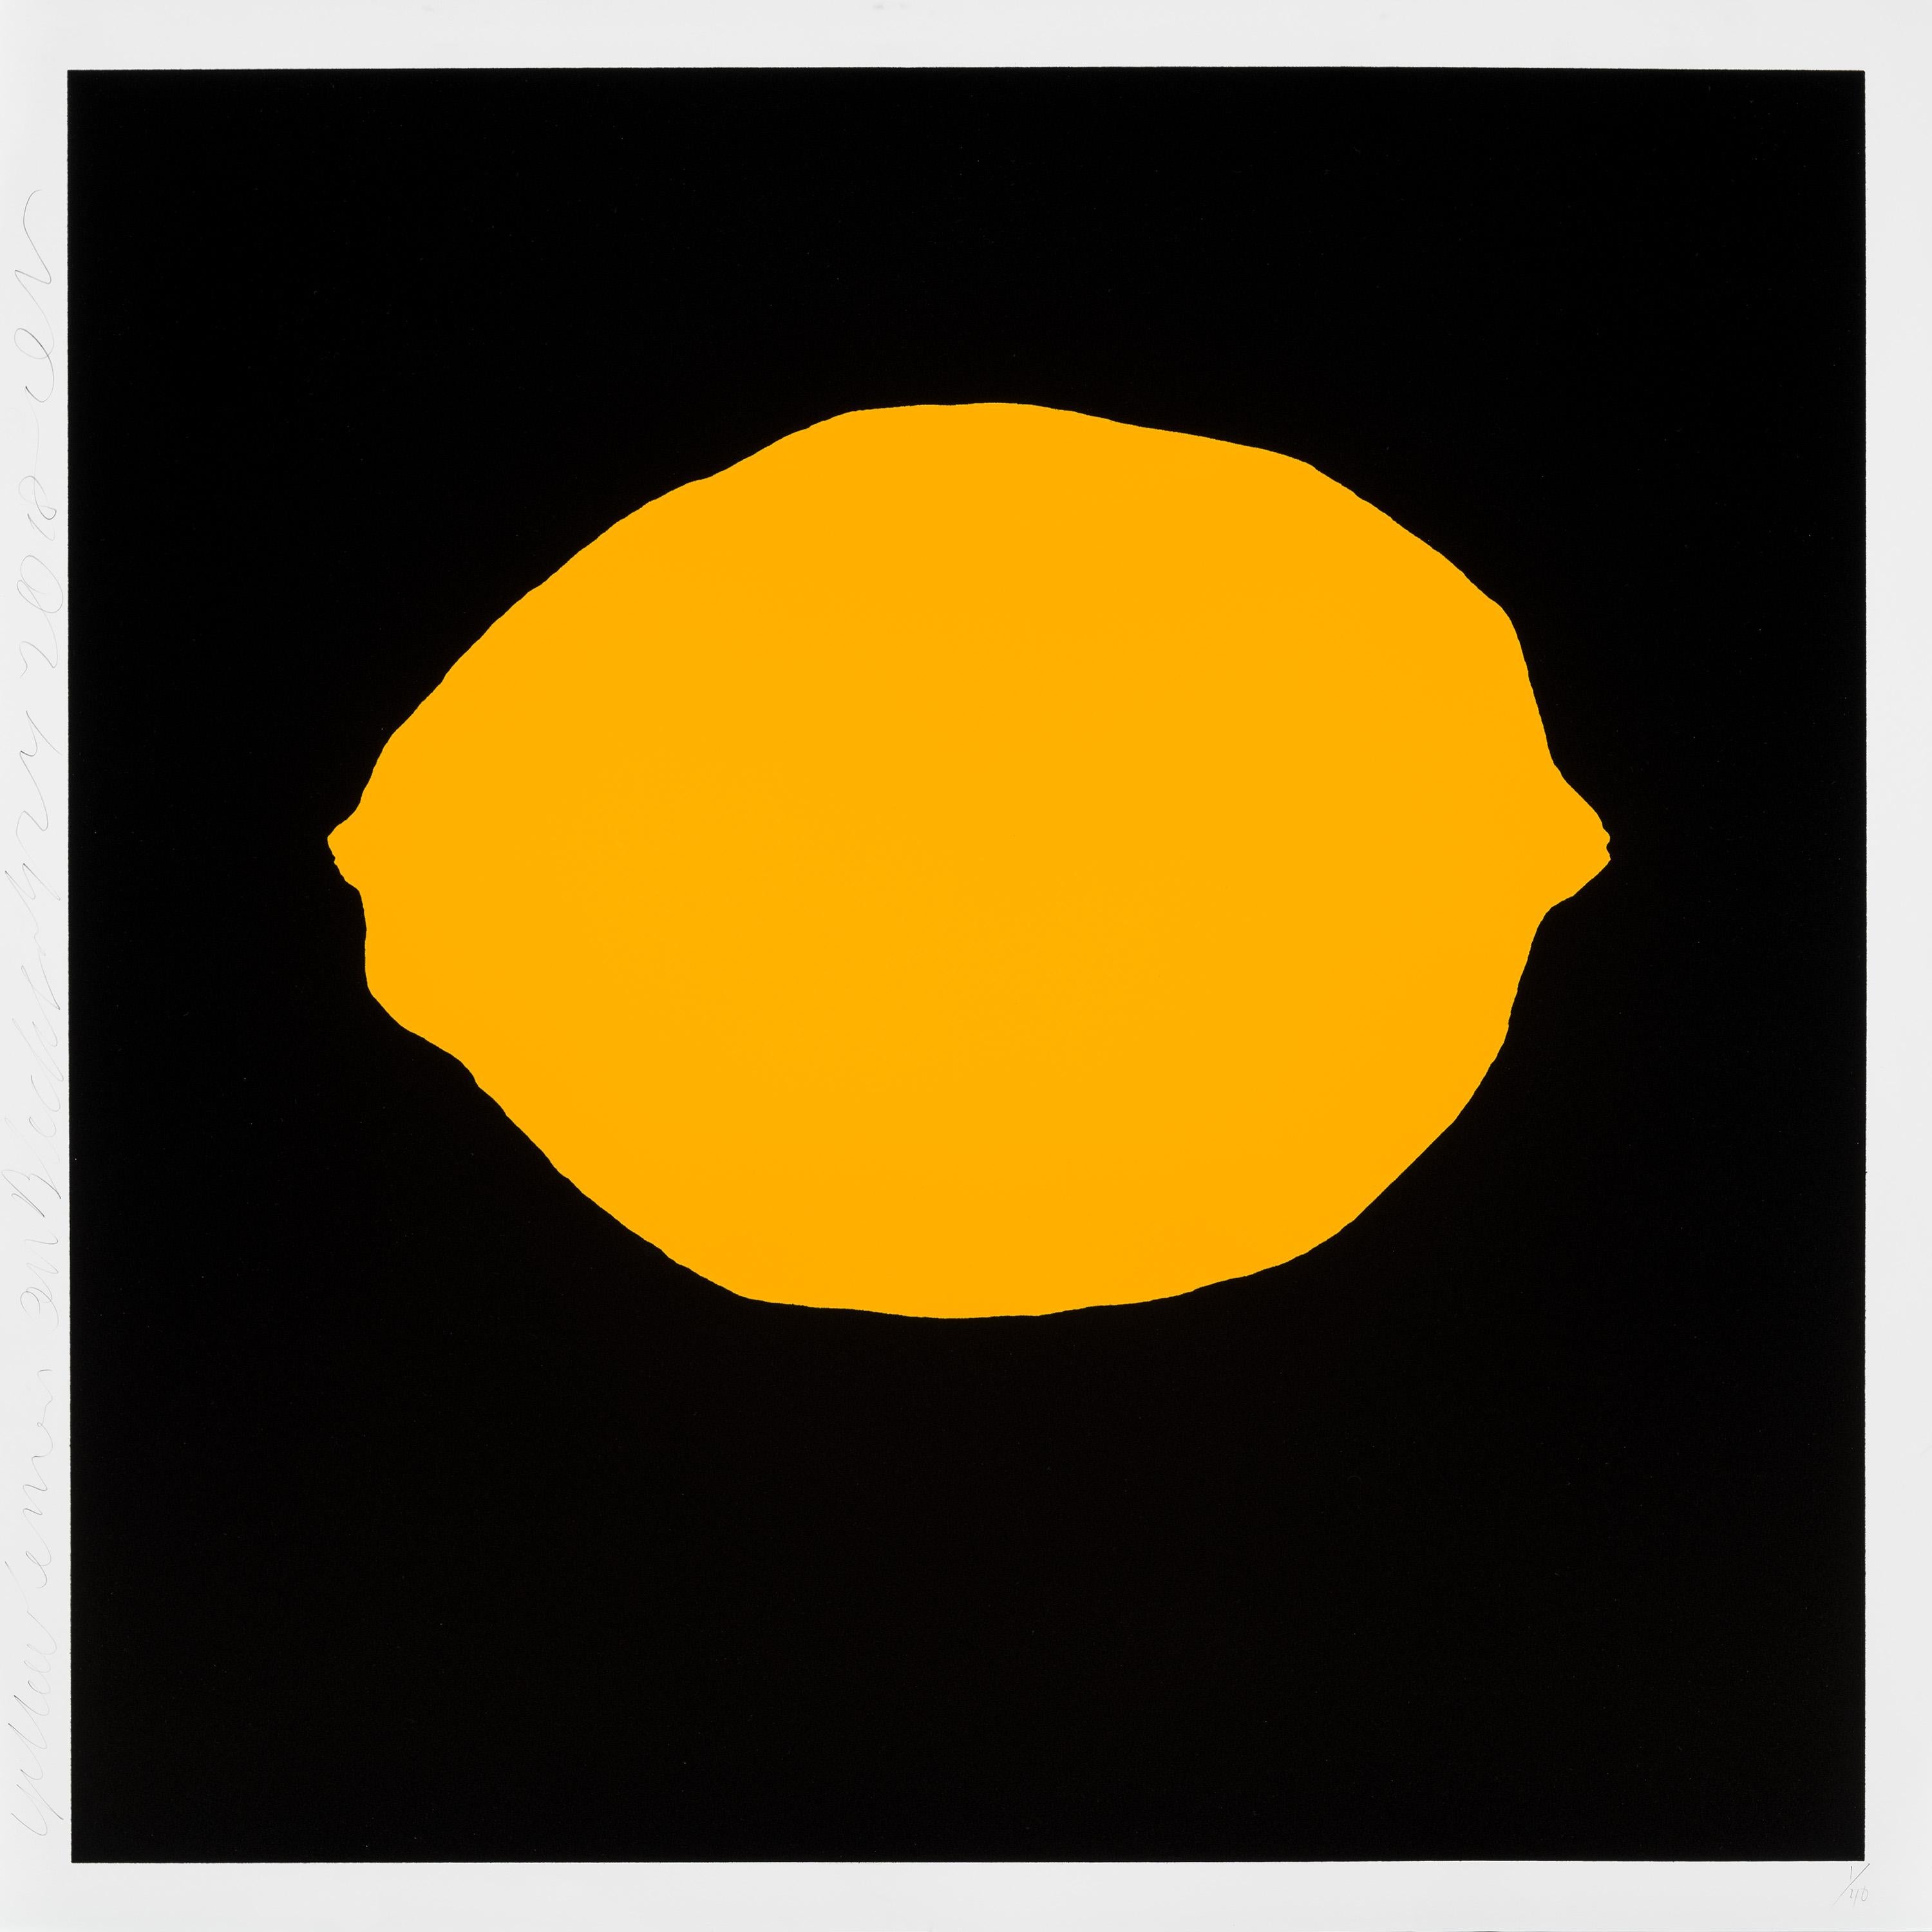 Yellow Lemon on Black, 2018, Color silkscreen with enamel inks - Print by Donald Sultan